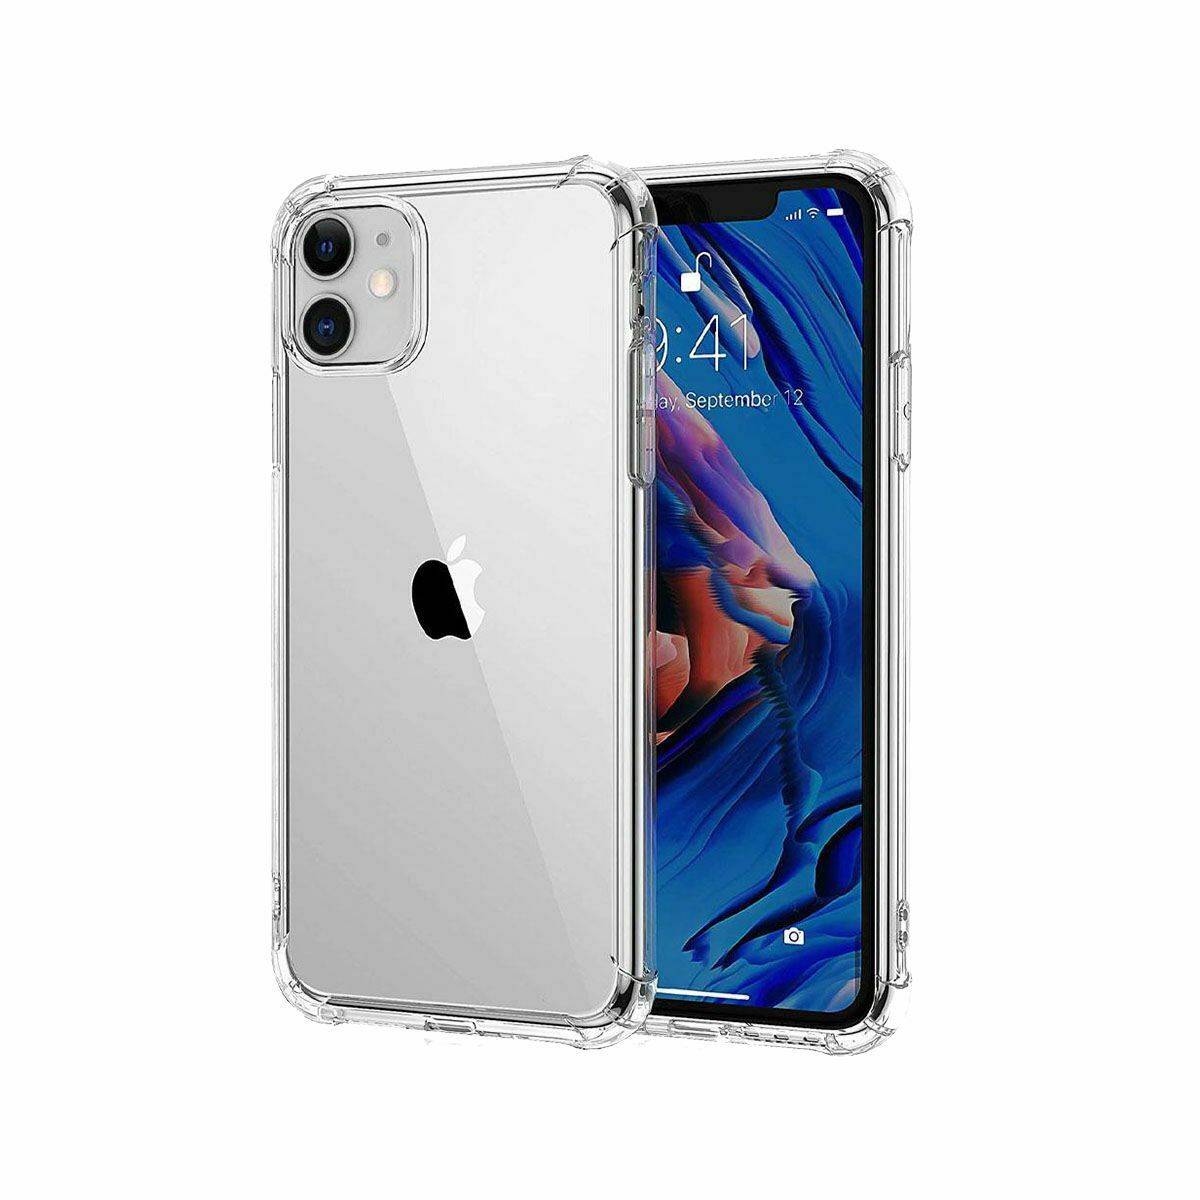 HZRICH iPhone XS Max Case, Clear Shockproof Bumper Case With[Glass Screen Protector] Soft TPU Silicone Case Cover[Drop Protection] Crystal Gel Case